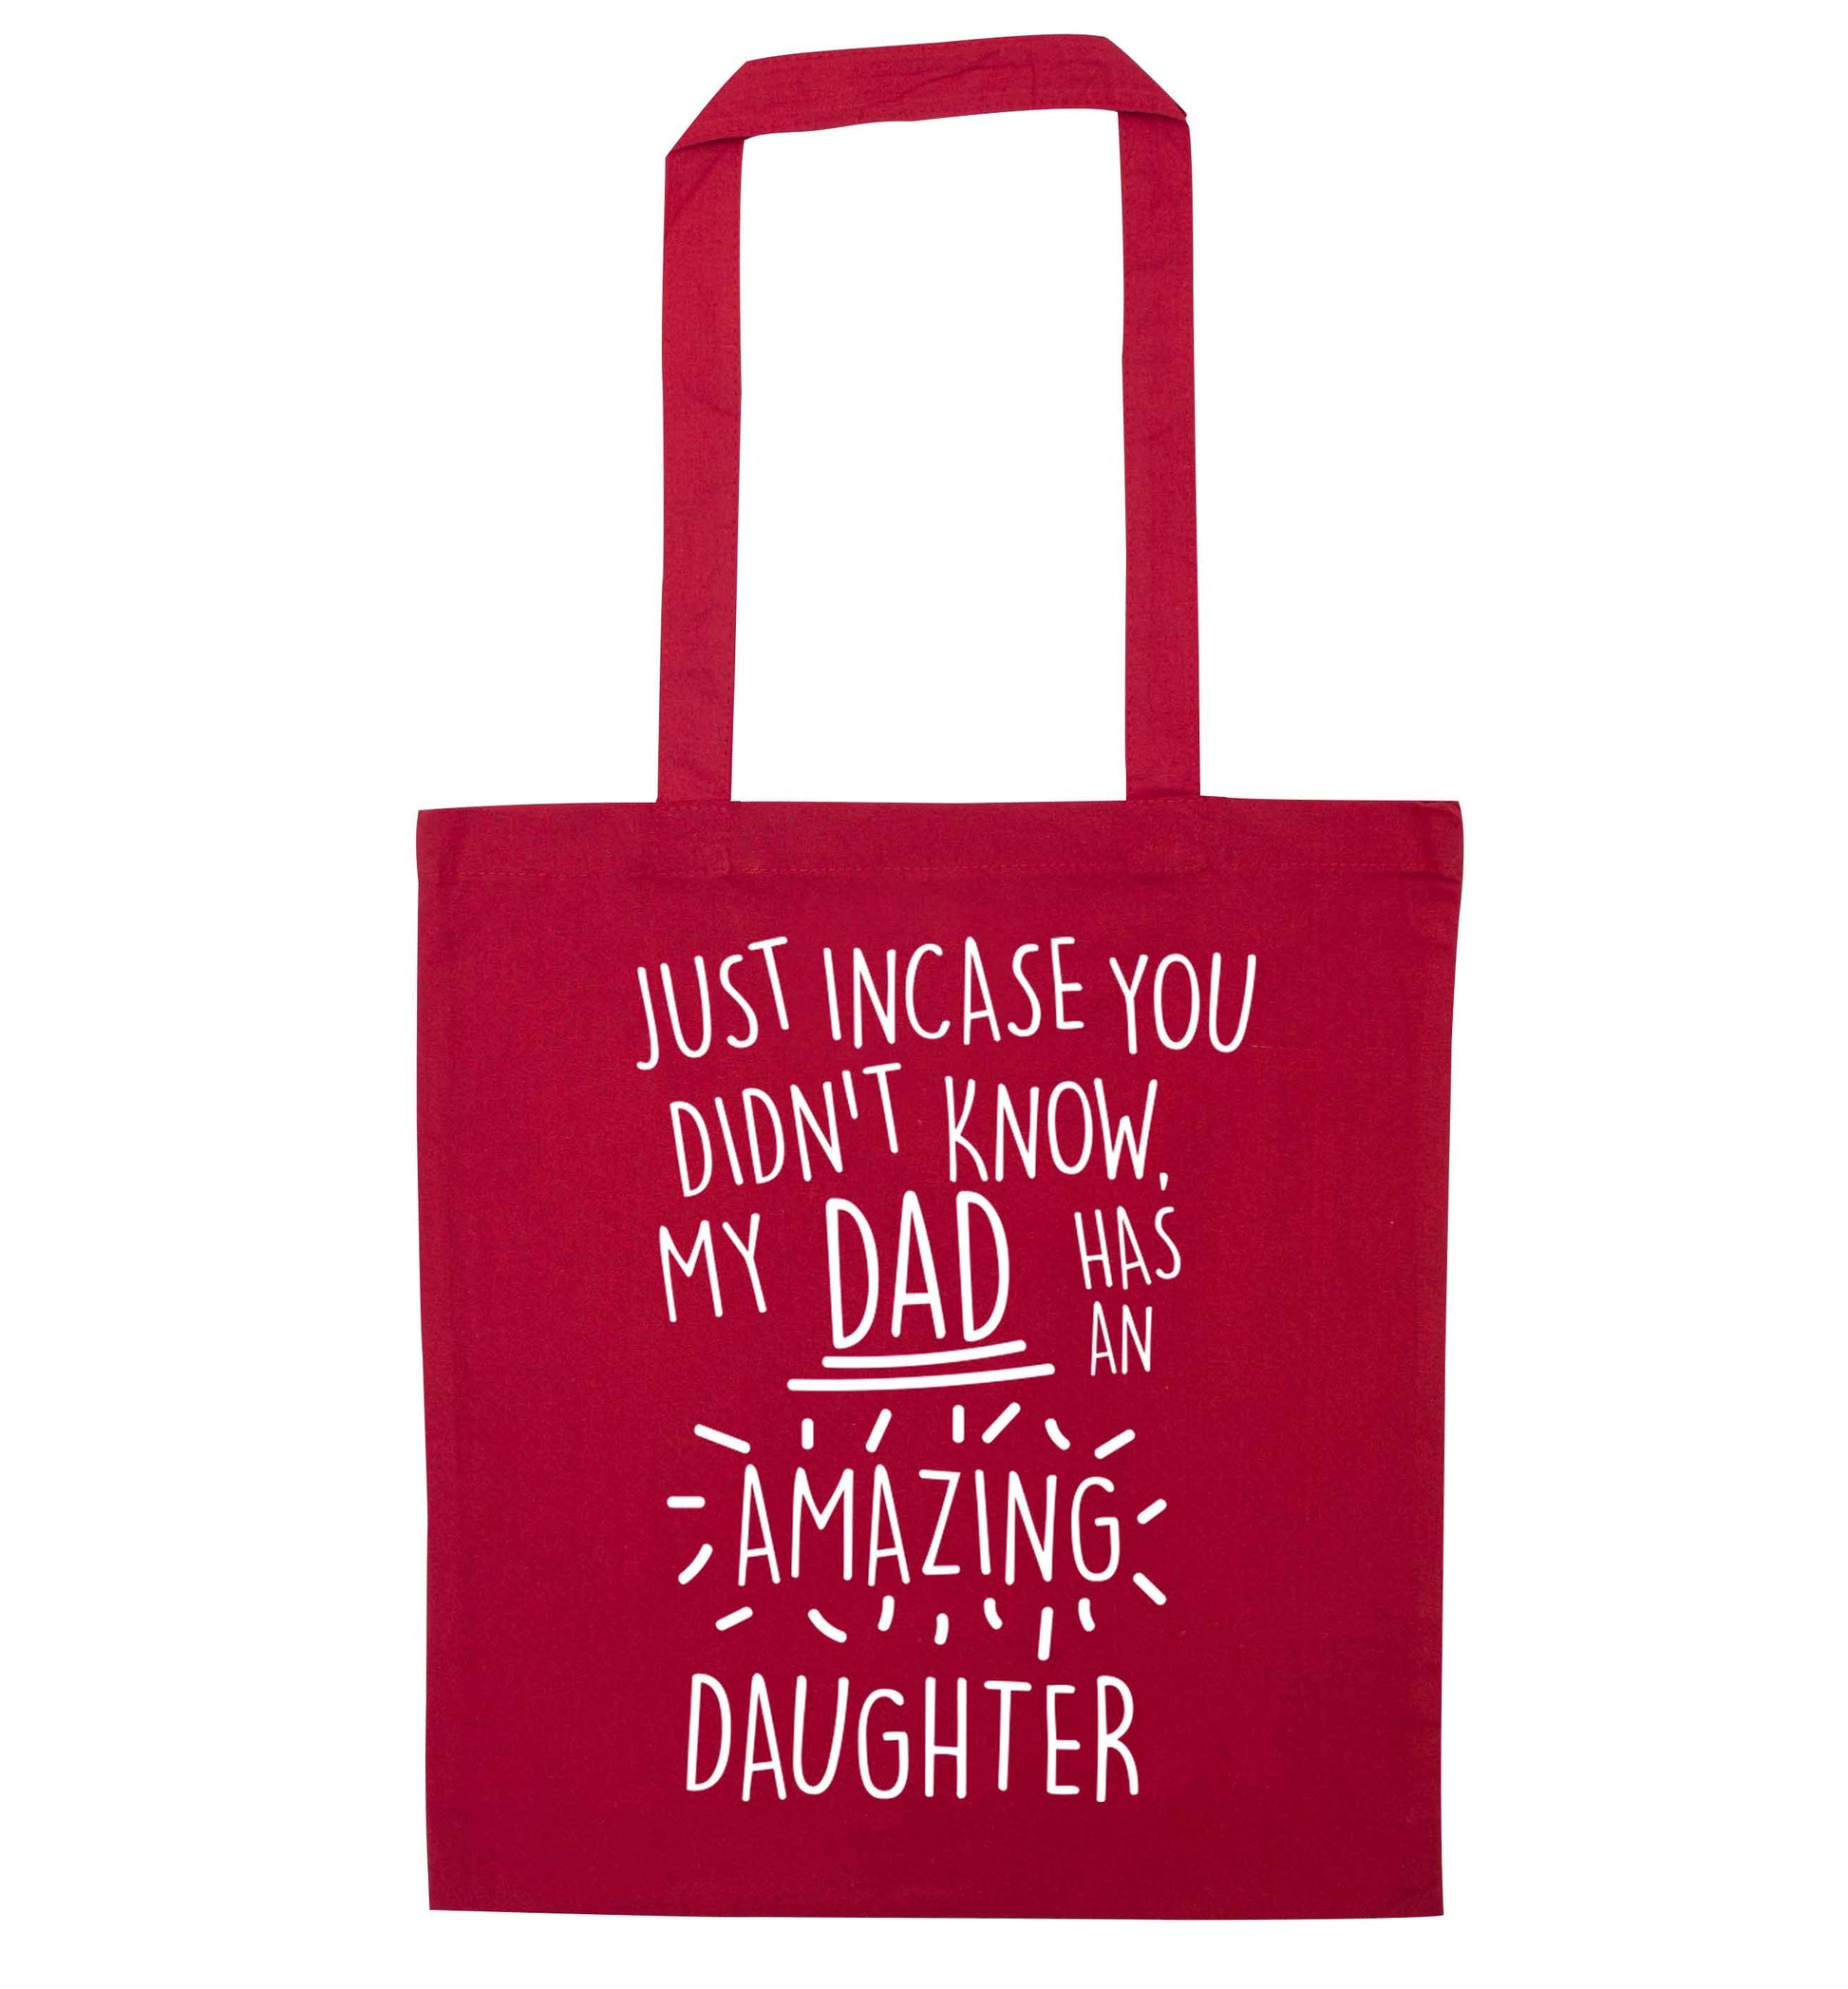 Just incase you didn't know my dad has an amazing daughter red tote bag